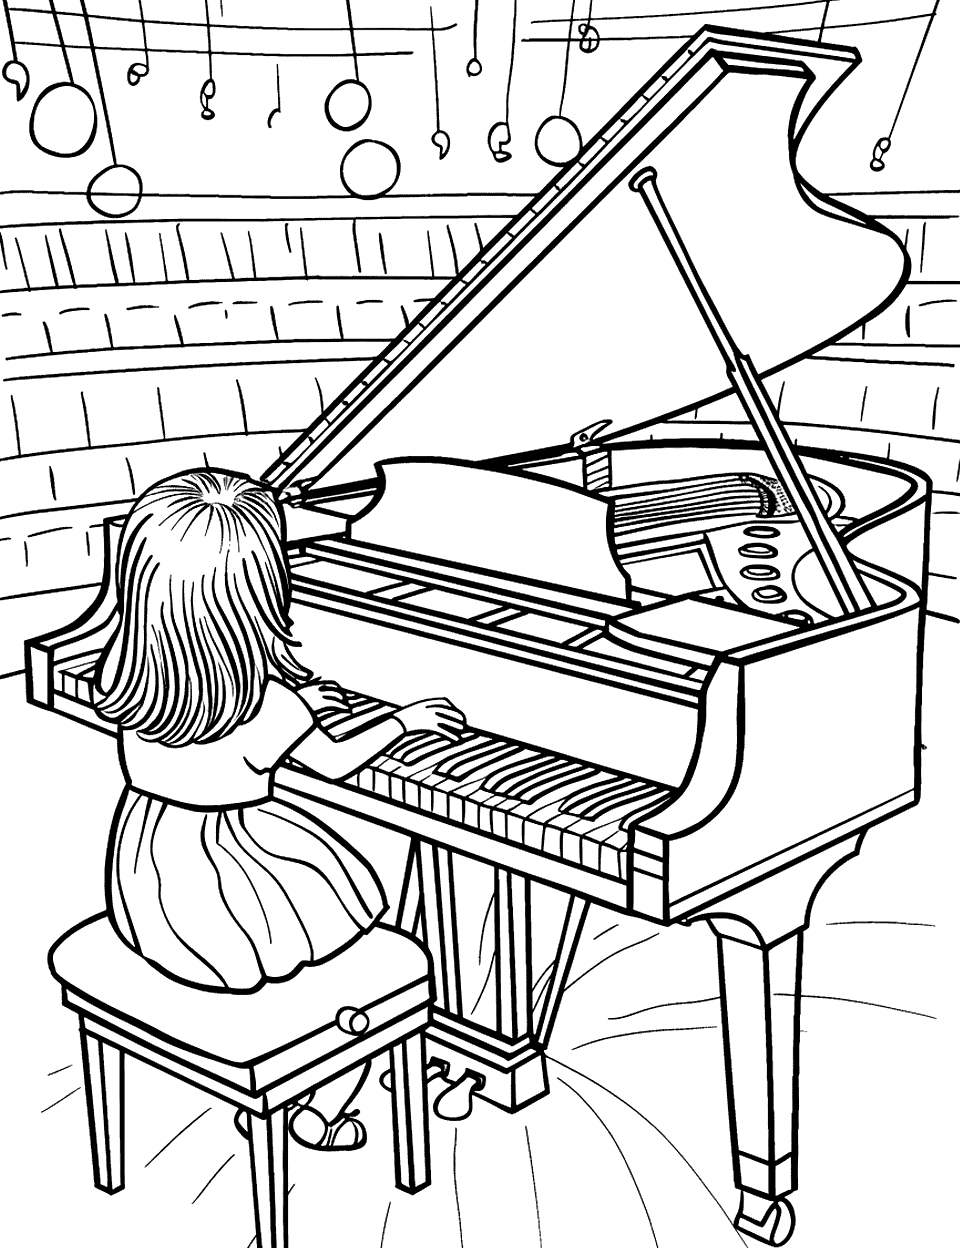 Piano Recital Music Coloring Page - A young girl confidently performing on a grand piano in a bright concert hall.